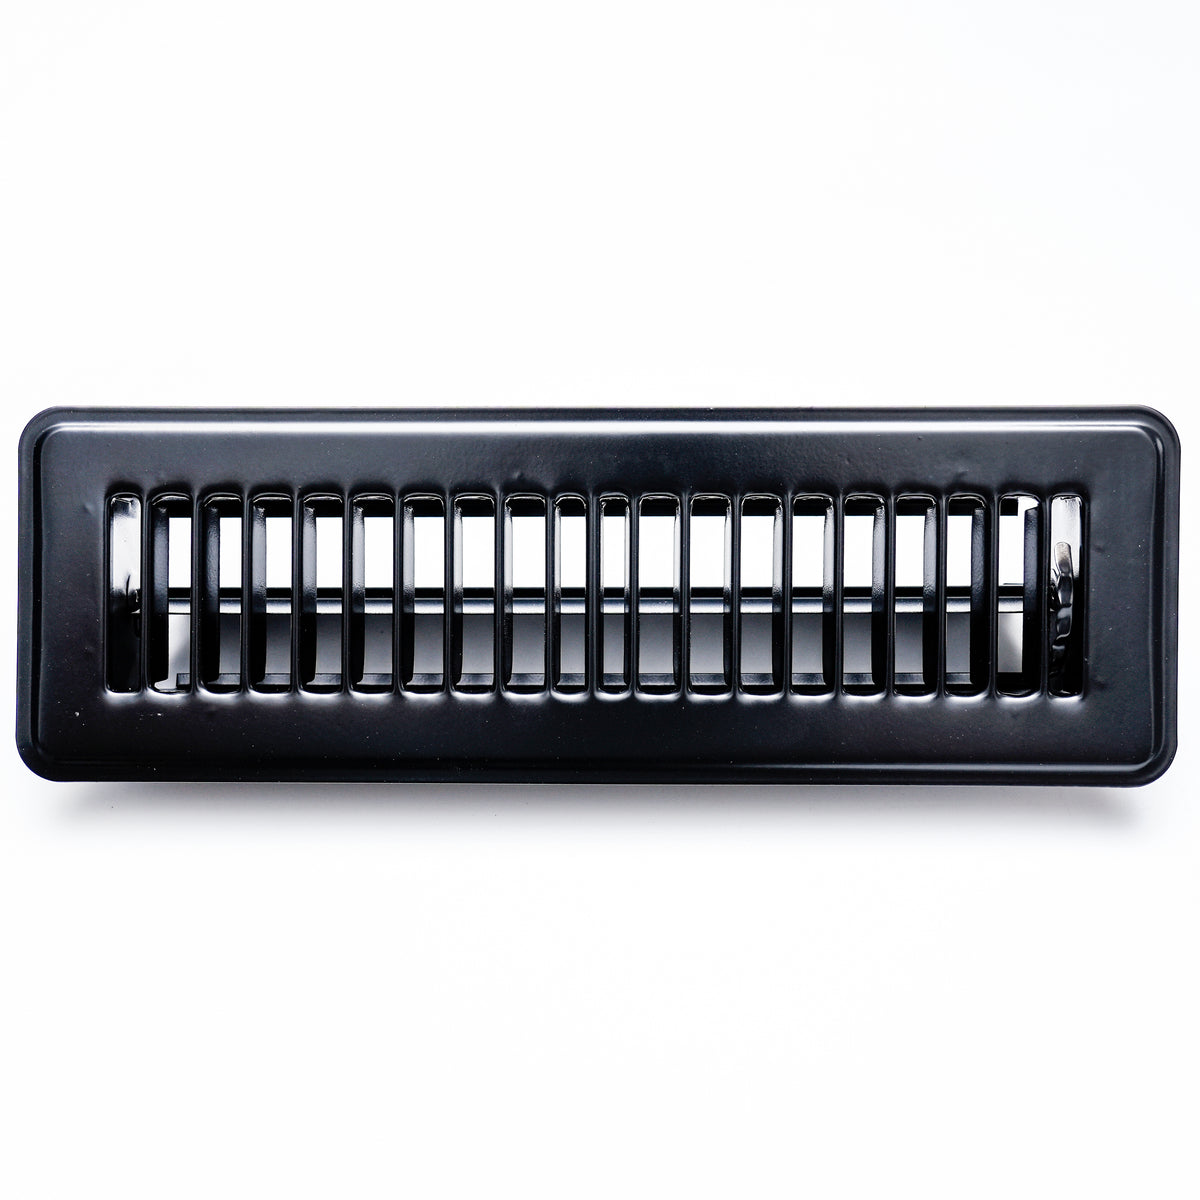 airgrilles 2" x 10" floor register with louvered design   heavy duty walkable design with damper   floor vent grille   easy to adjust air supply lever   black hnd-flg-bl-2x10  - 1